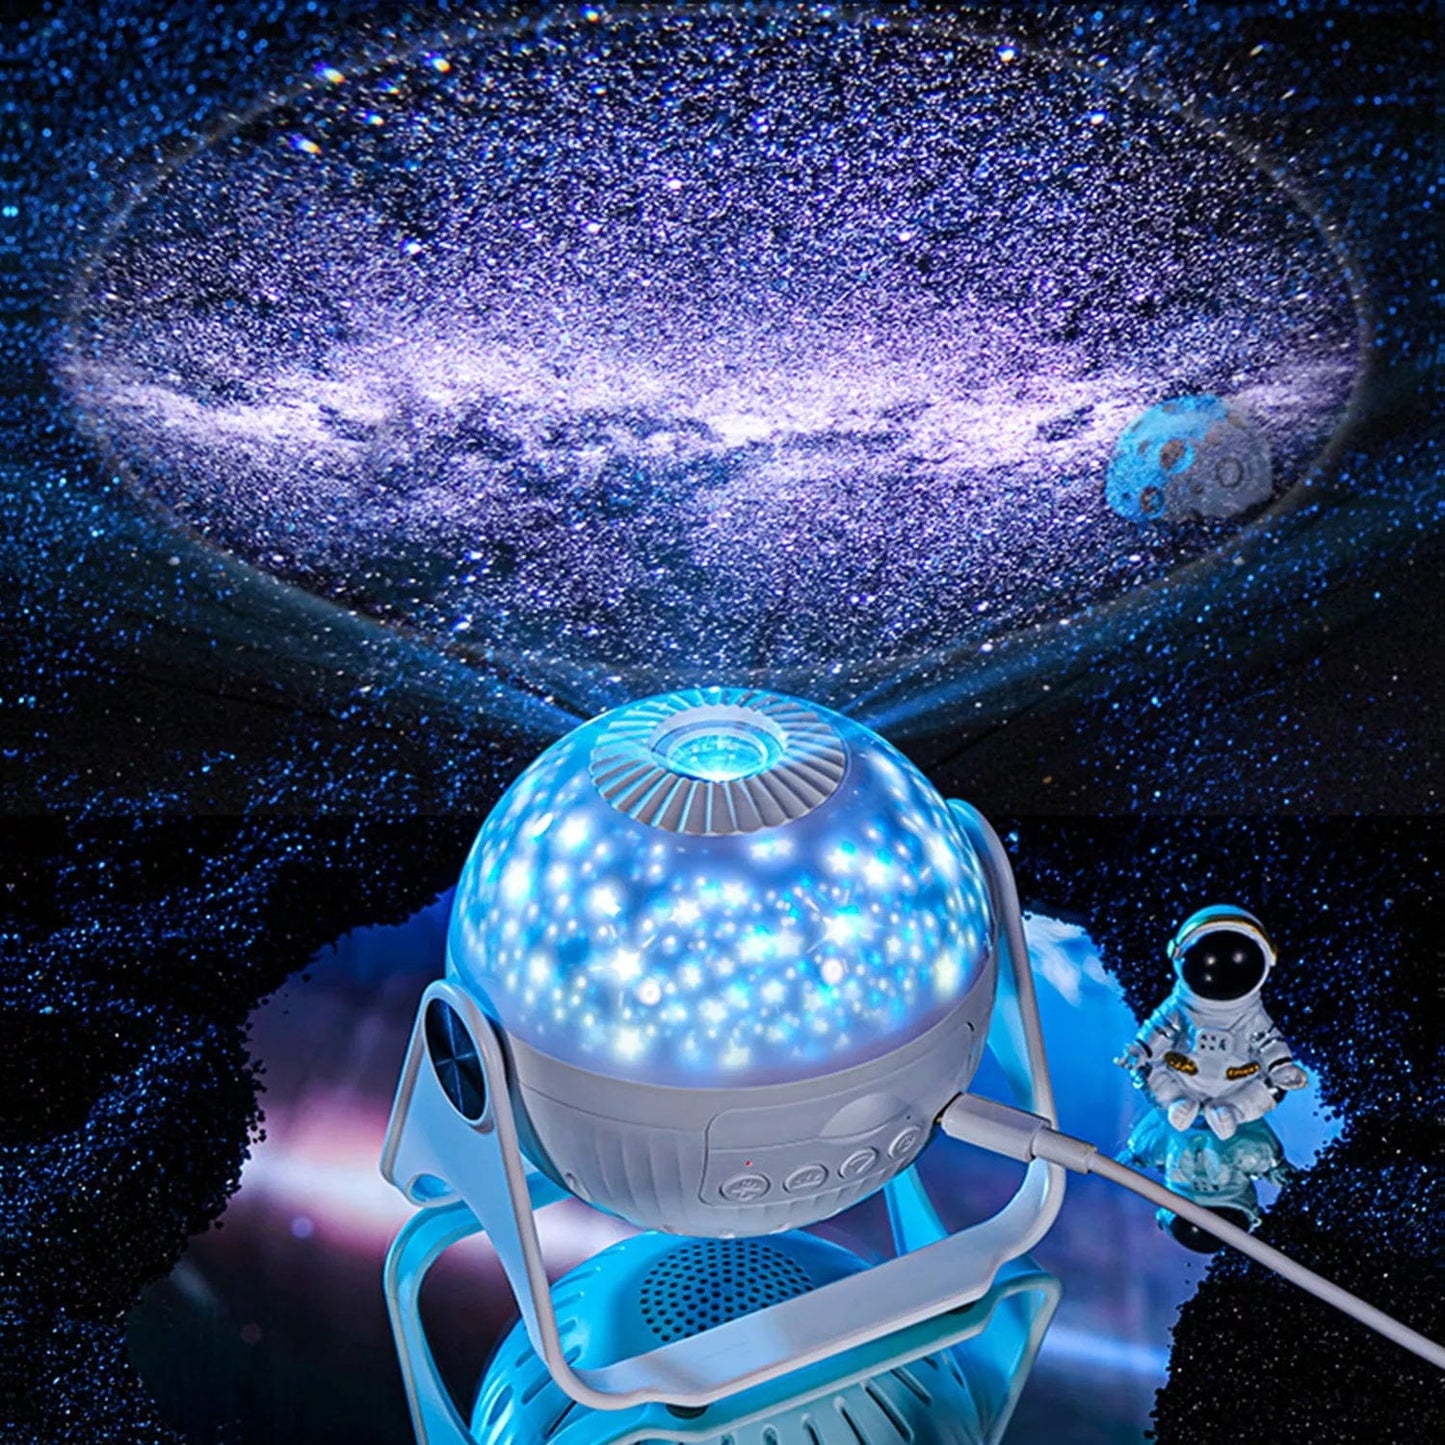 Surprise your friends and family with the Planetarium Projector 2.0